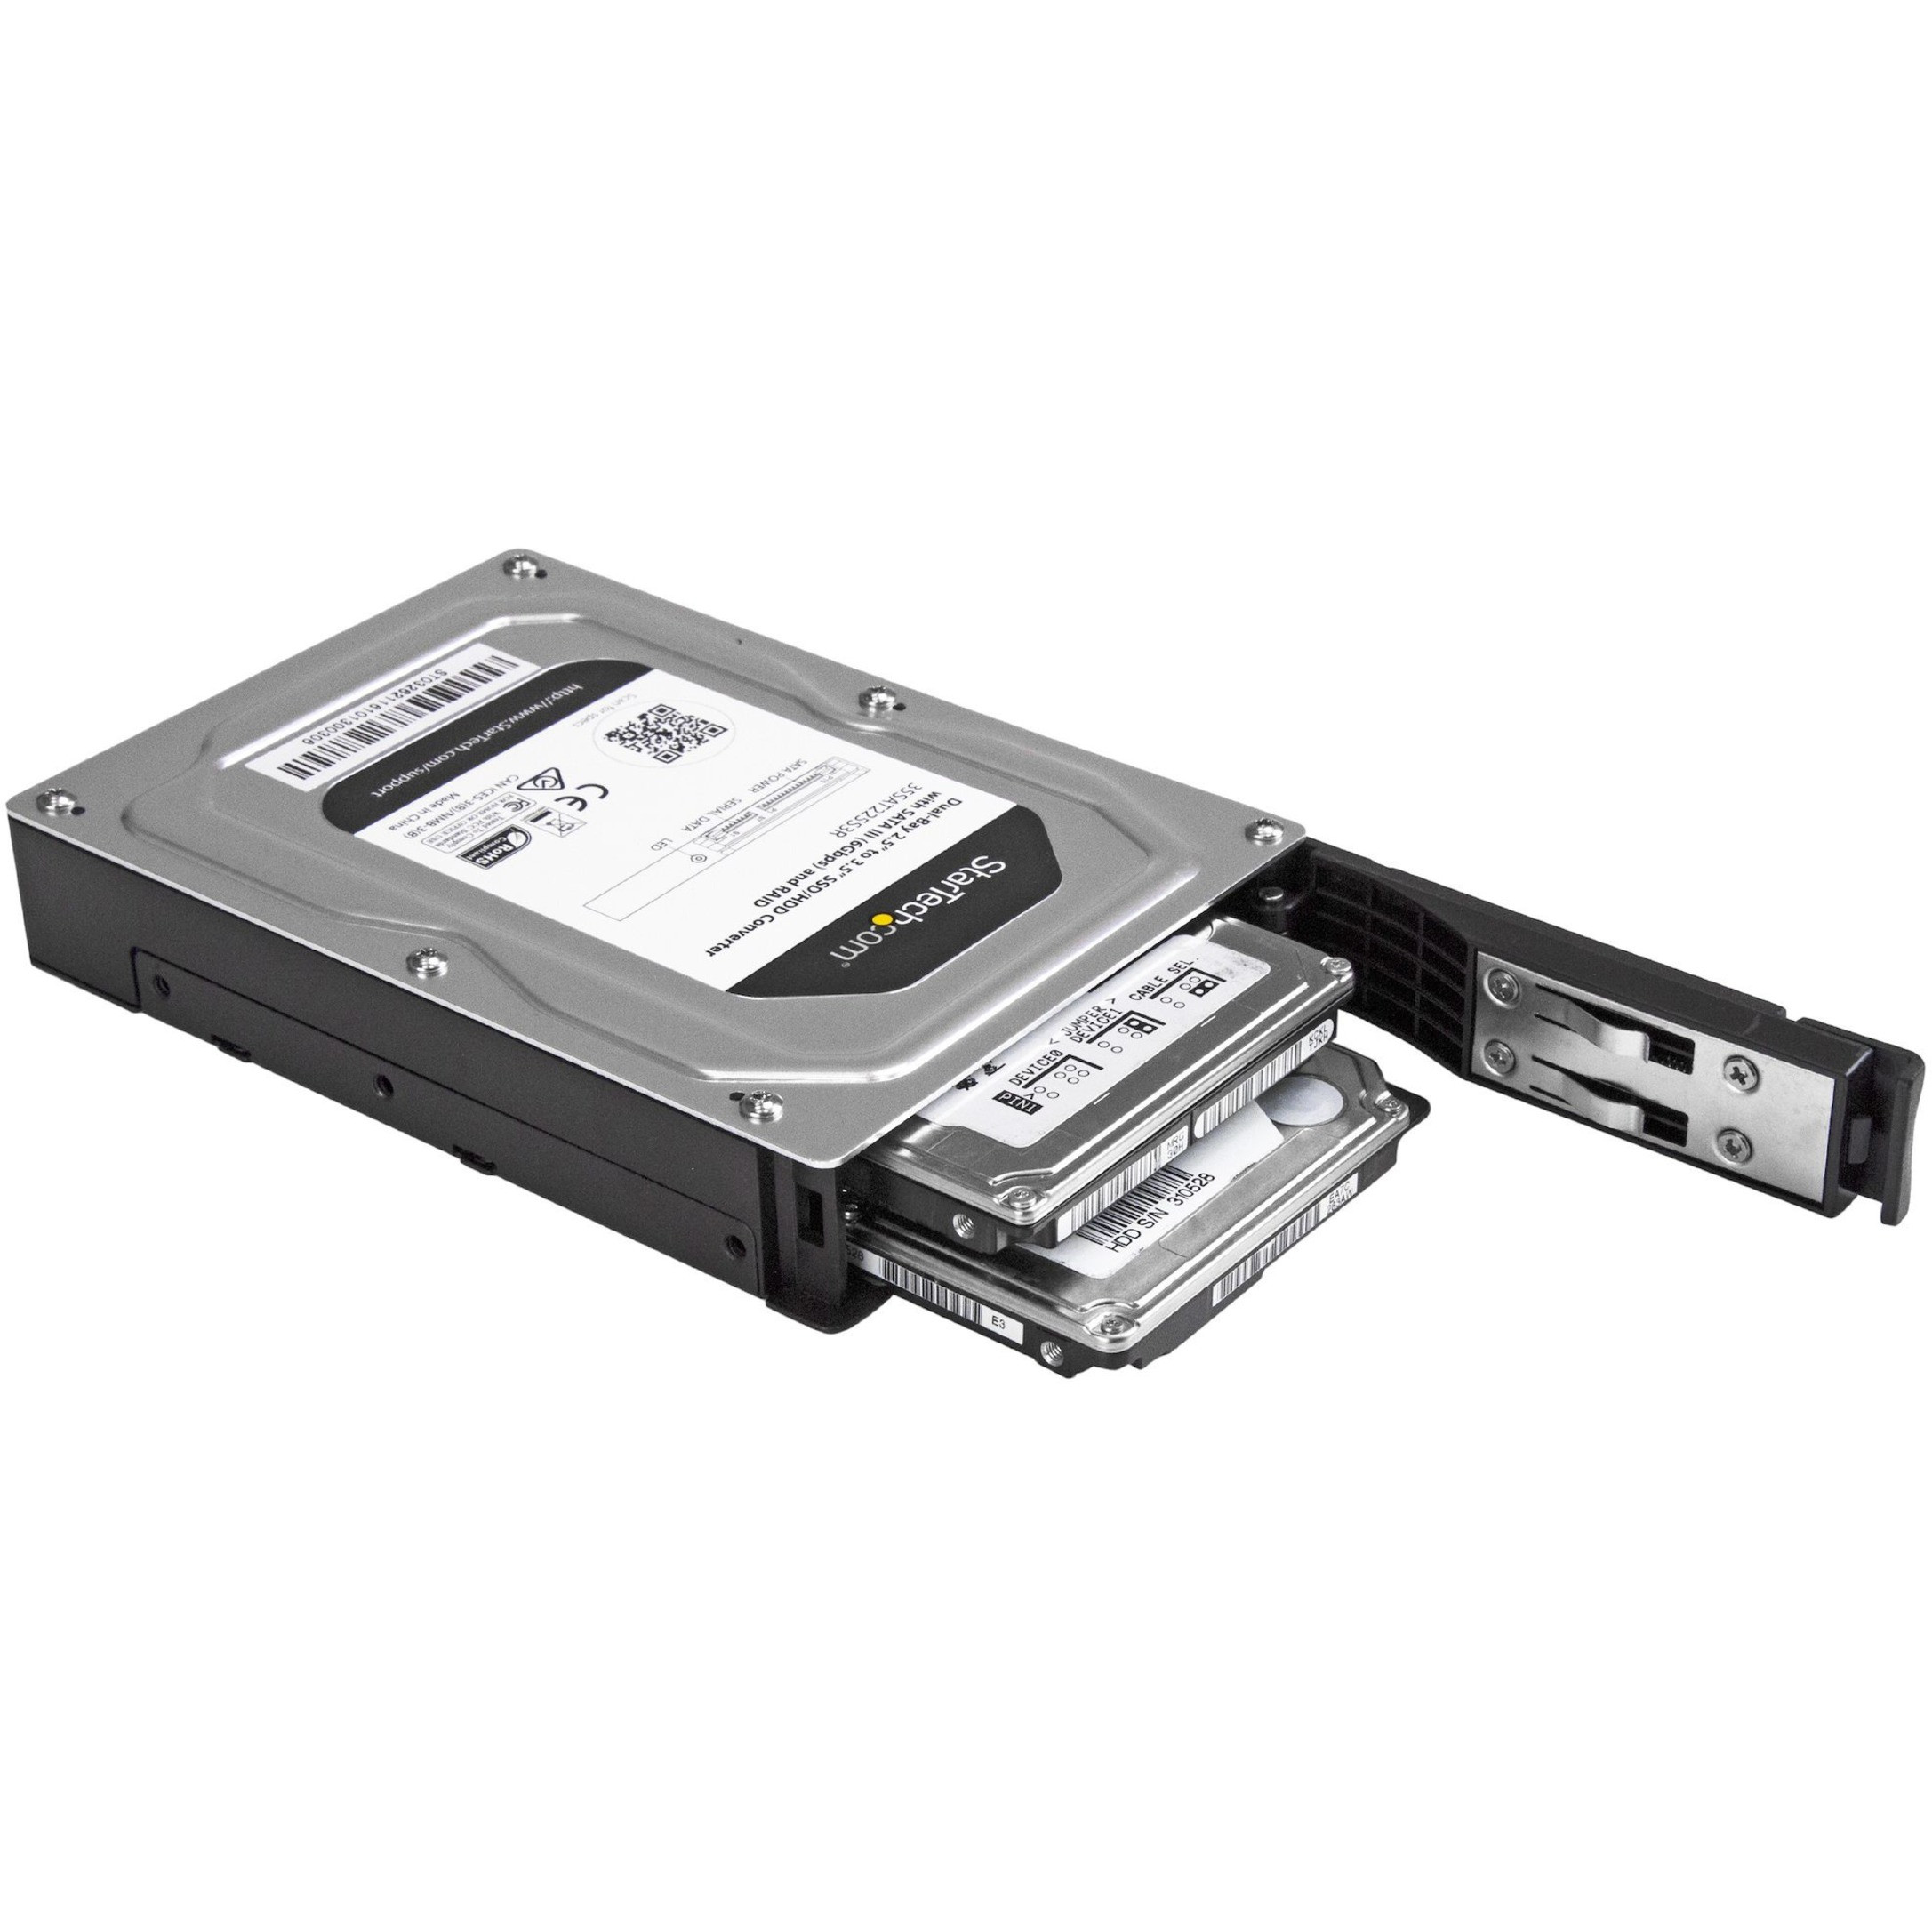 Startech .com Dual-Bay 2.5in to 3.5in SATA Hard Drive Adapter Enclosure with RAIDSupports SATA III & RAID 0, 1, Spanning, Aluminum -... 35SAT225S3R - Corporate Armor